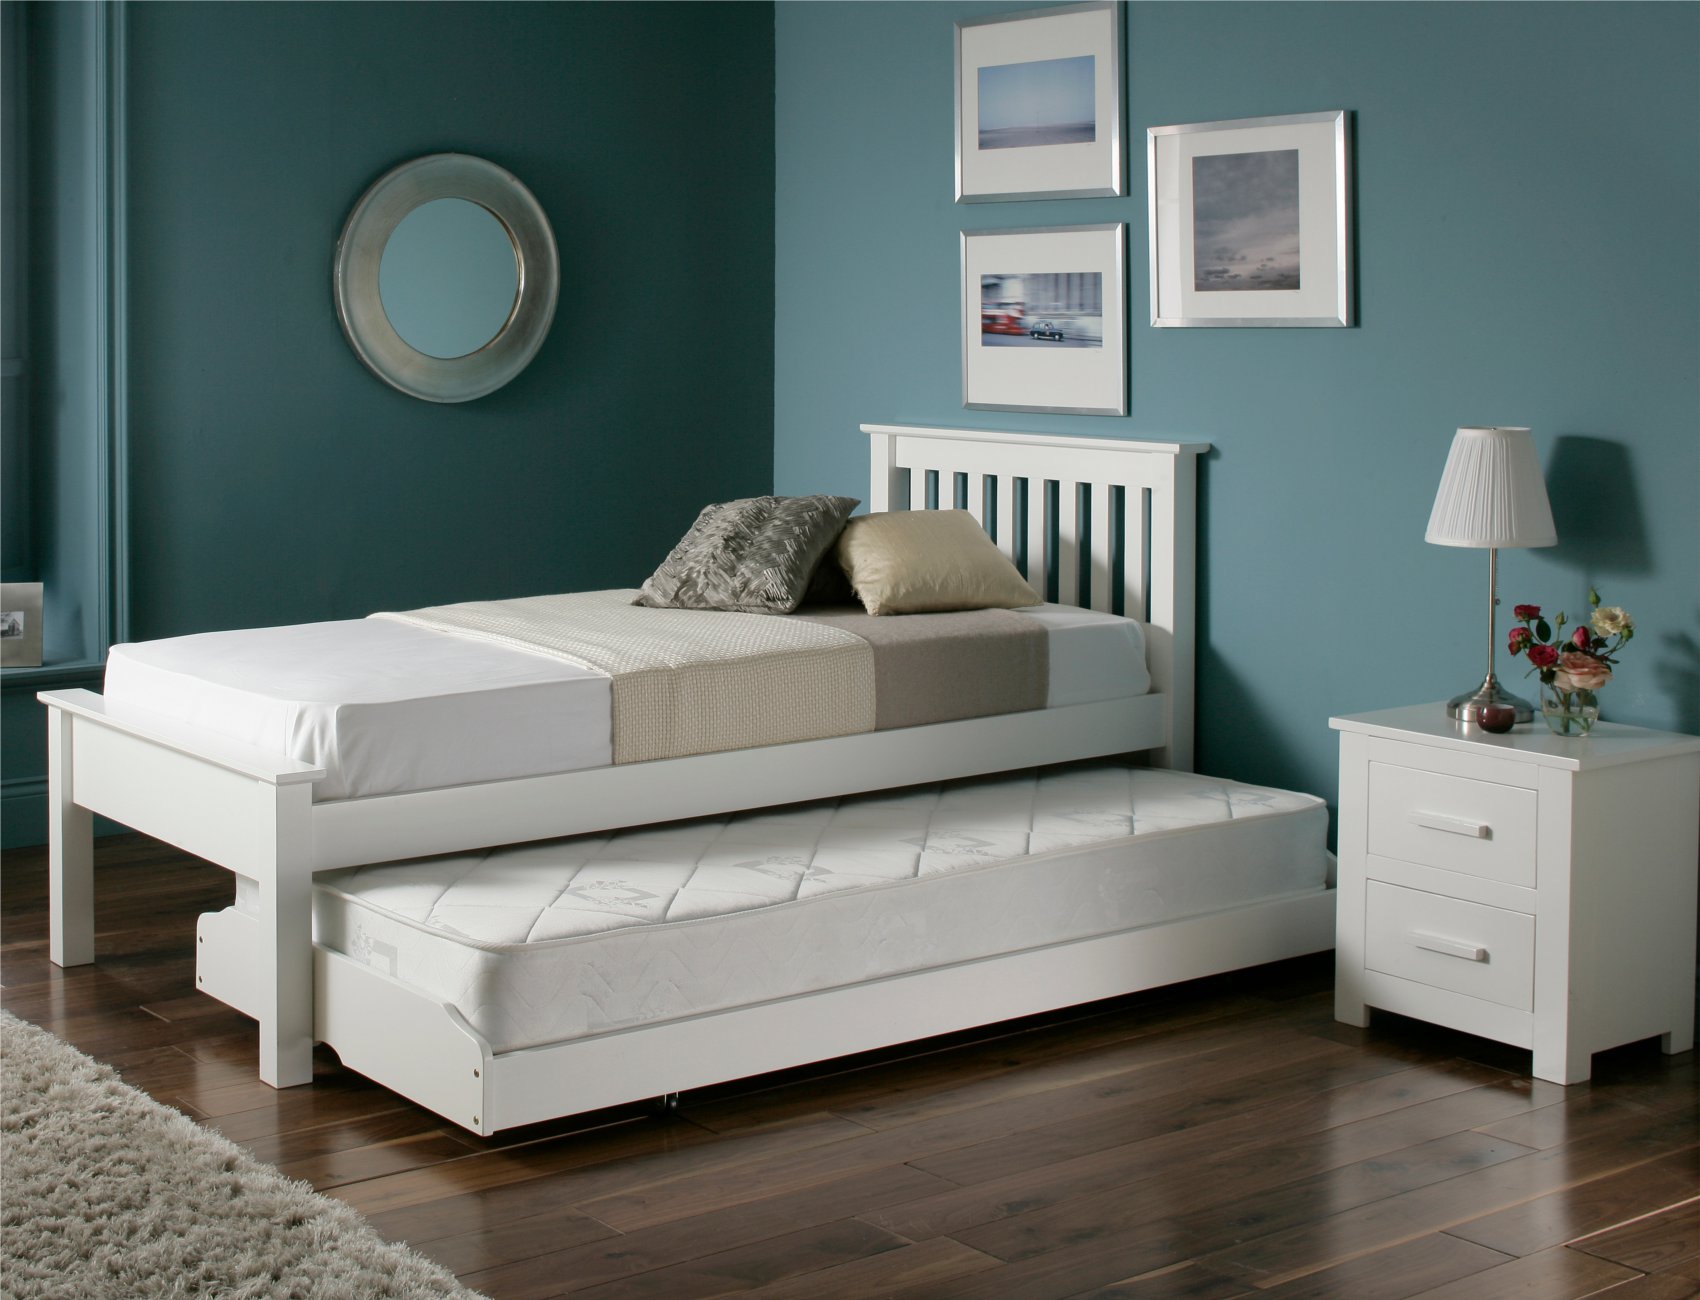 View Atlantis White Wooden Guest Bed Including Underbed Time4Sleep information